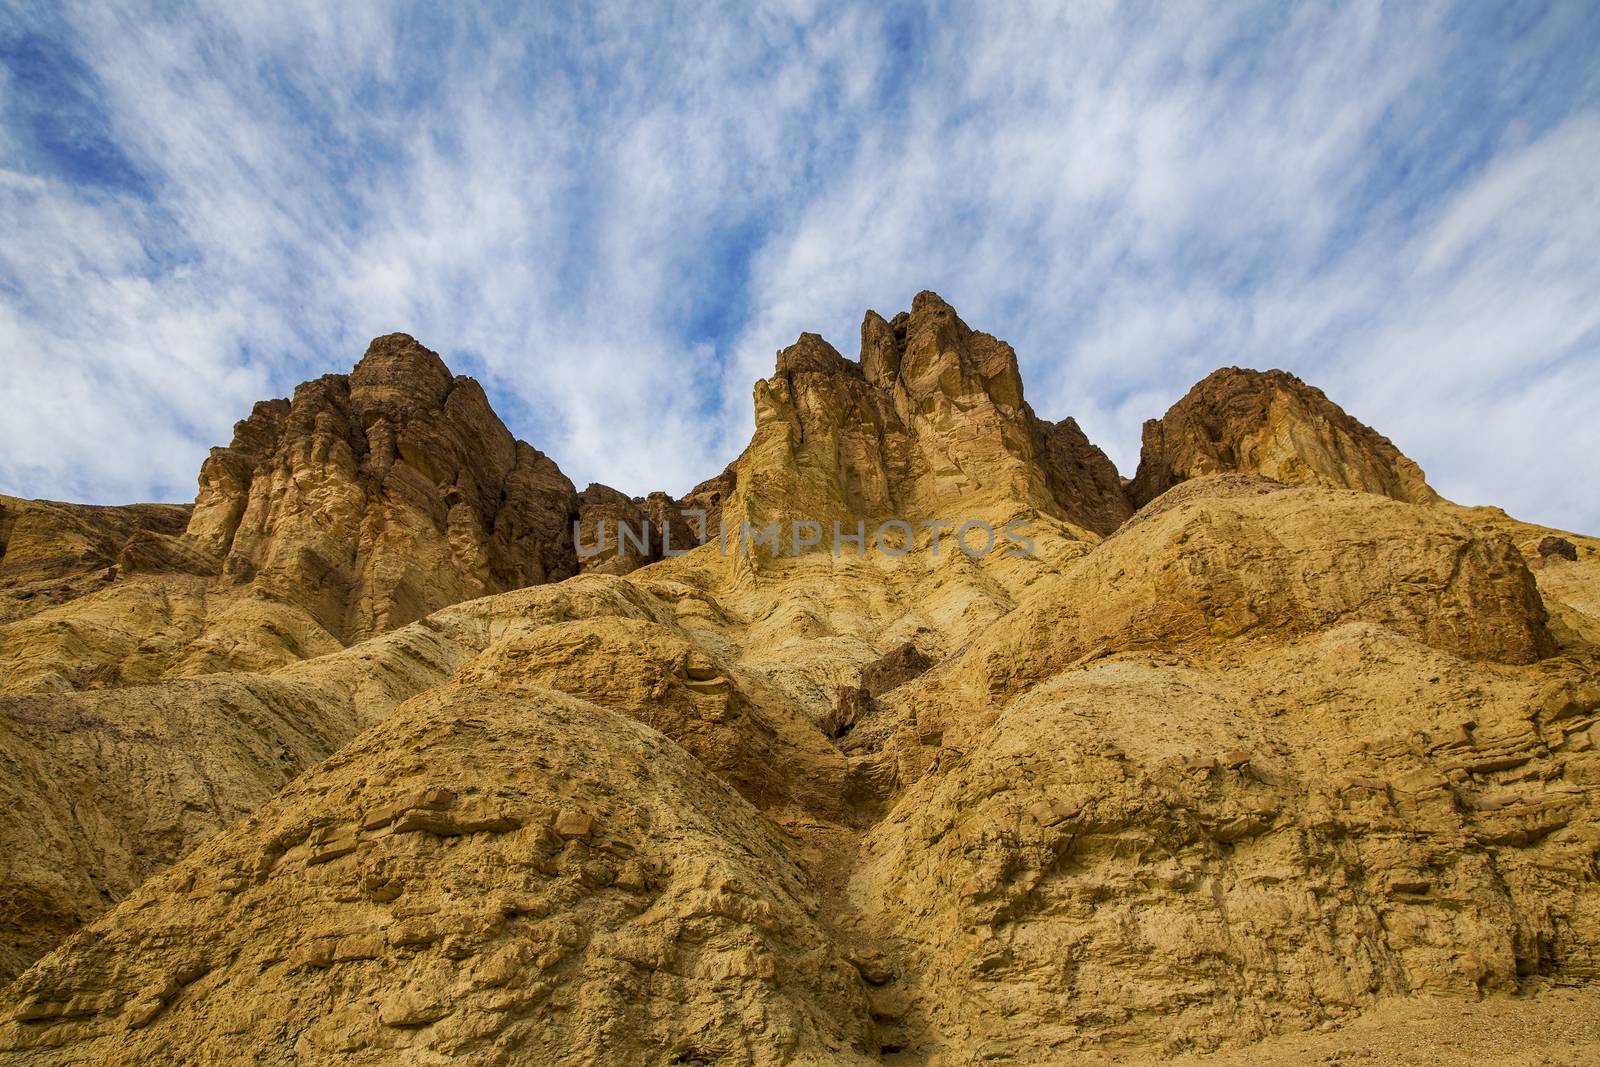 Sky and cliffs at Golden Canyon in Death Valley California USA